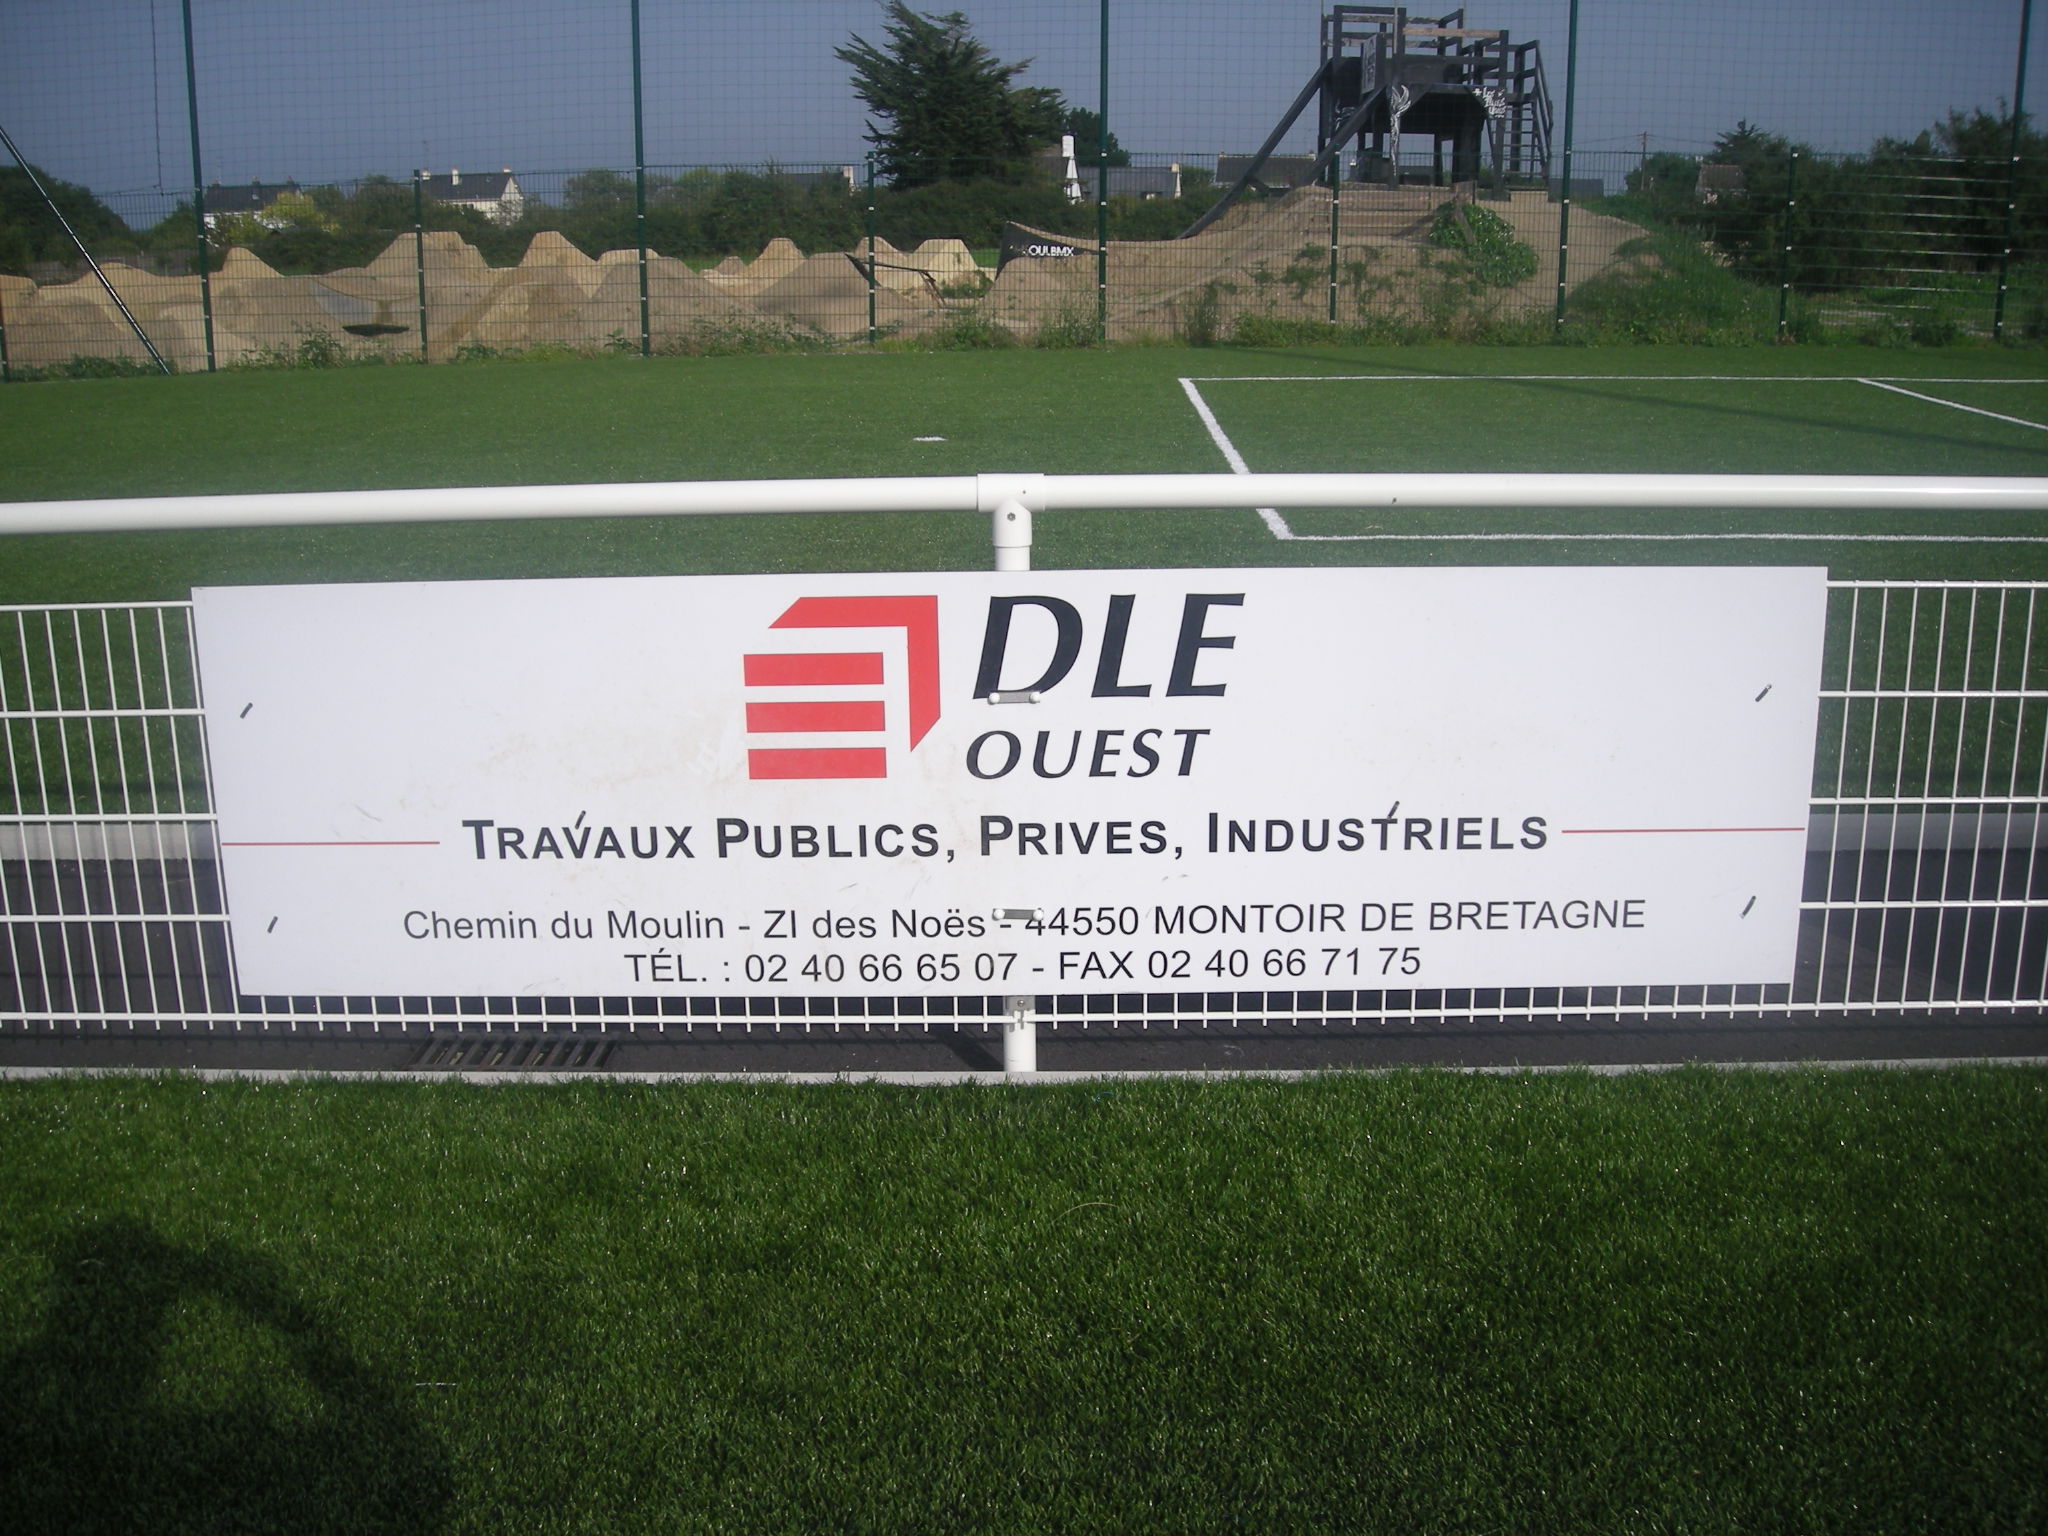 dle ouest